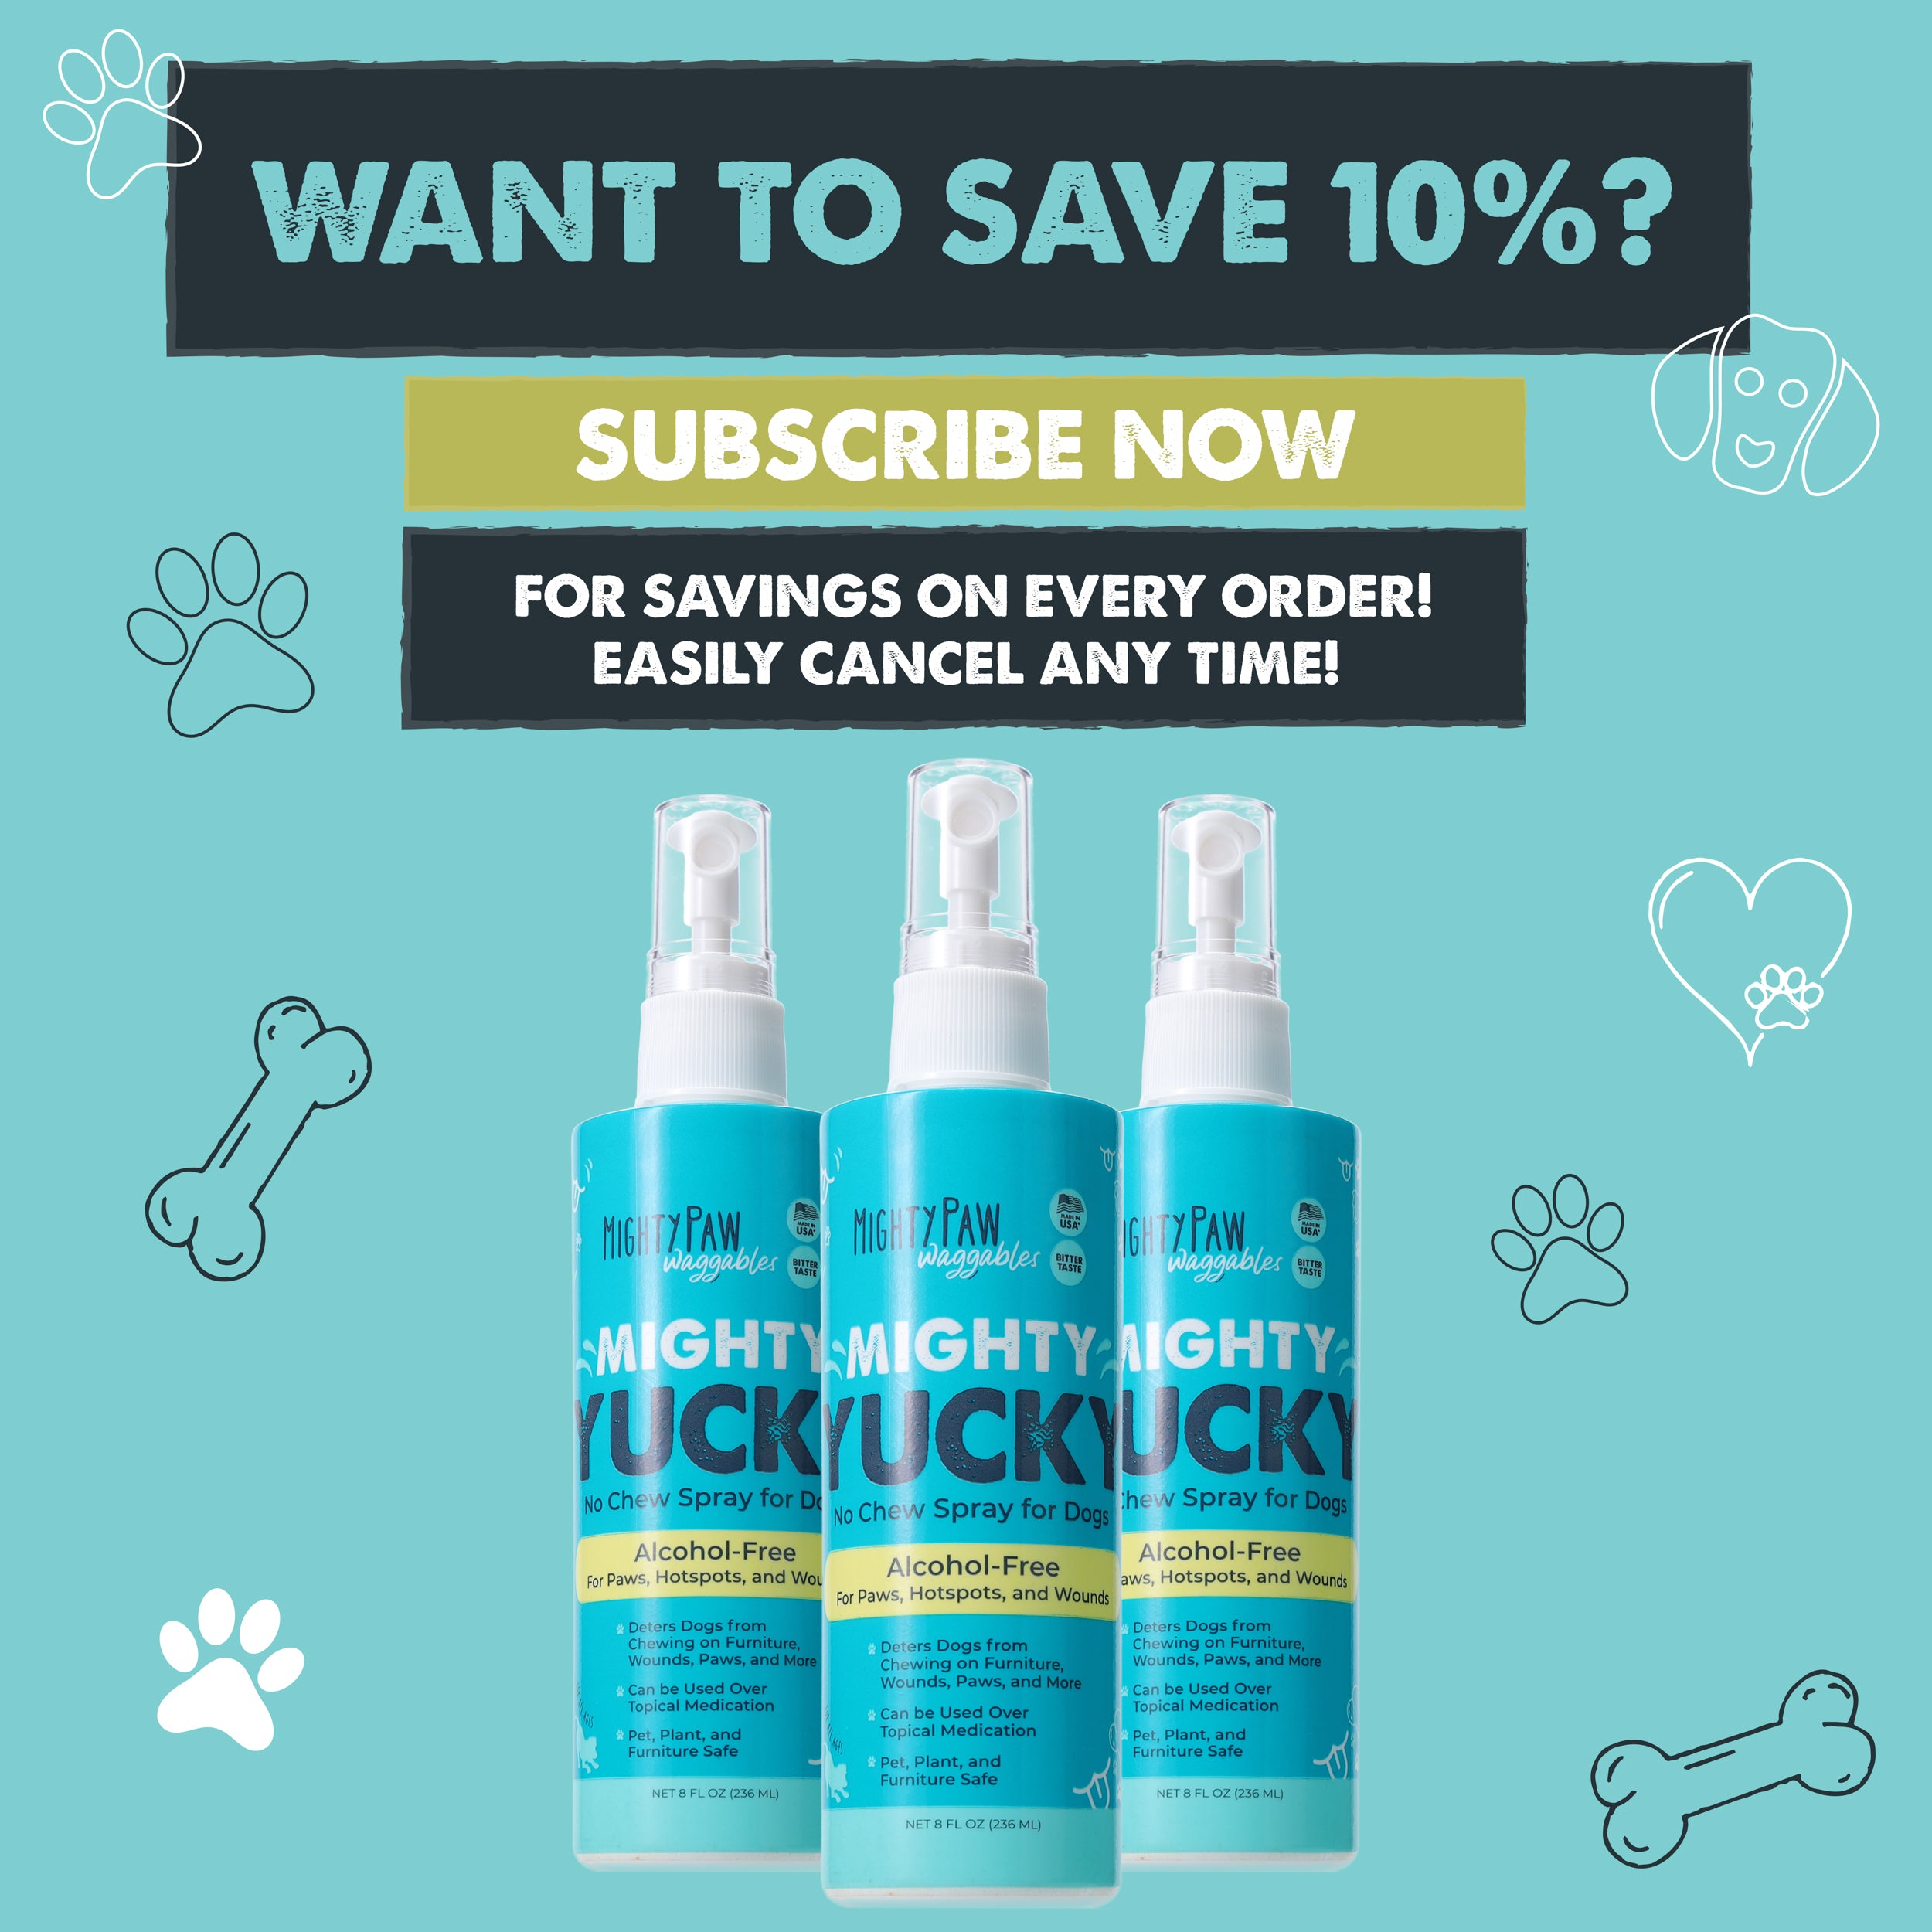 Mighty Yucky Bitter No Chew Pet Spray for Training and Healing